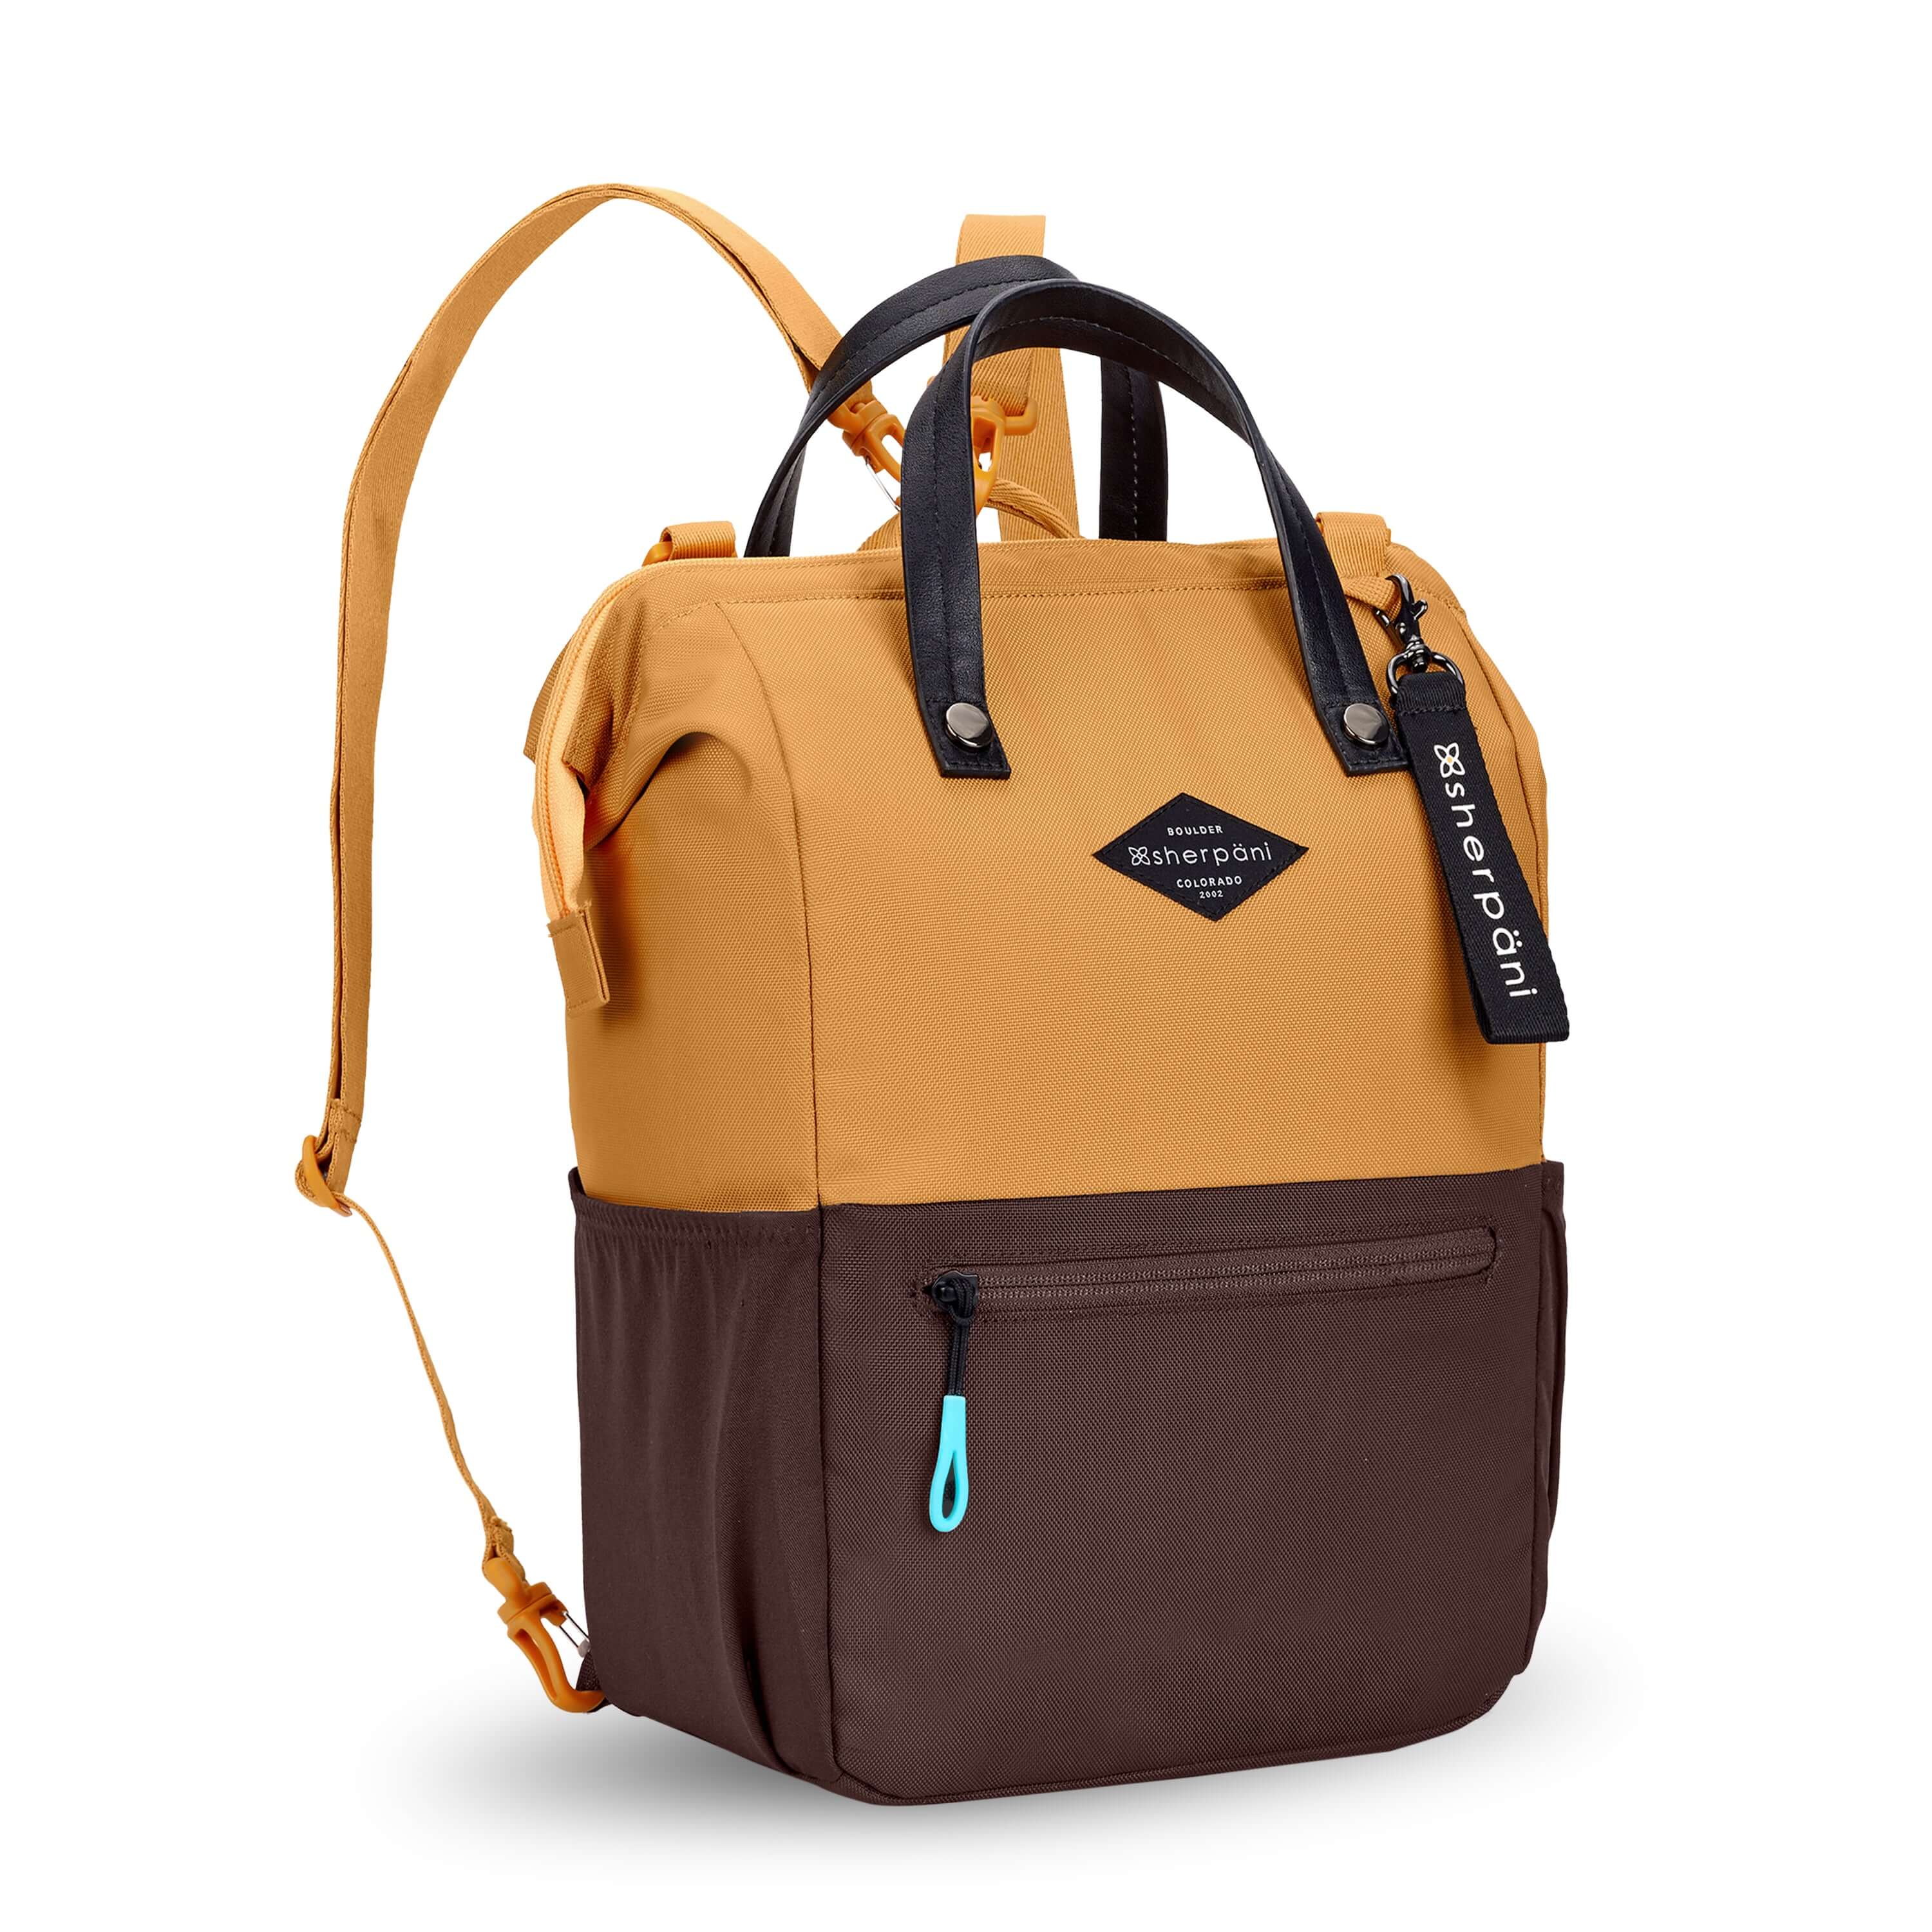 Angled front view of Sherpani three in one bag, the Dispatch in Sundial. The bag is two toned: the top is burnt yellow and the bottom is brown. There is an external zipper pocket on the front panel. Easy pull zippers are accented in aqua. A branded Sherpani keychain is clipped to the upper right corner. Elastic water bottle holders sit on either side of the bag. It has short tote handles and adjustable/detachable straps that can function for a backpack or crossbody. 